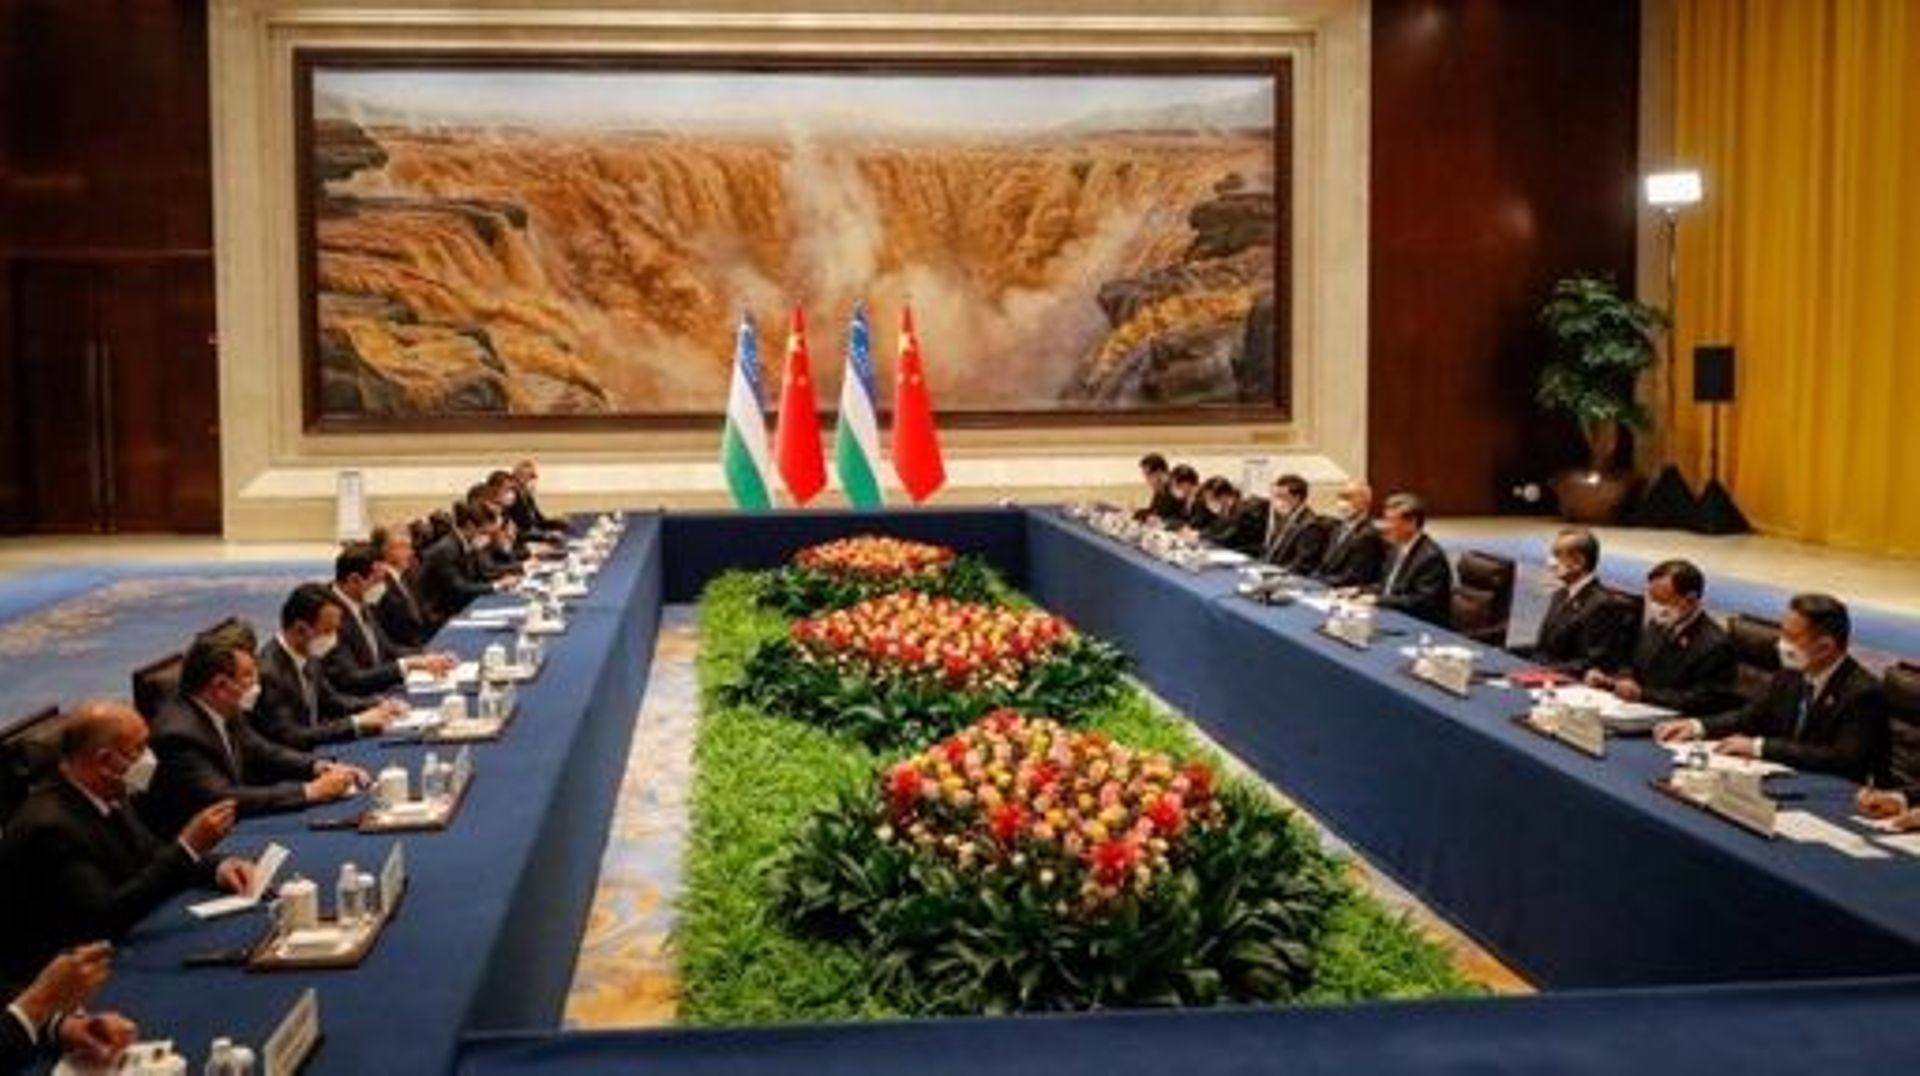 Chinese President Xi Jinping (center-R) speaks to Uzbekistan President Shavkat Mirziyoyev during a bilateral meeting on the sidelines of the China-Central Asia Summit in Xian, Shaanxi province on May 18, 2023.   Mark CRISTINO / POOL / AFP